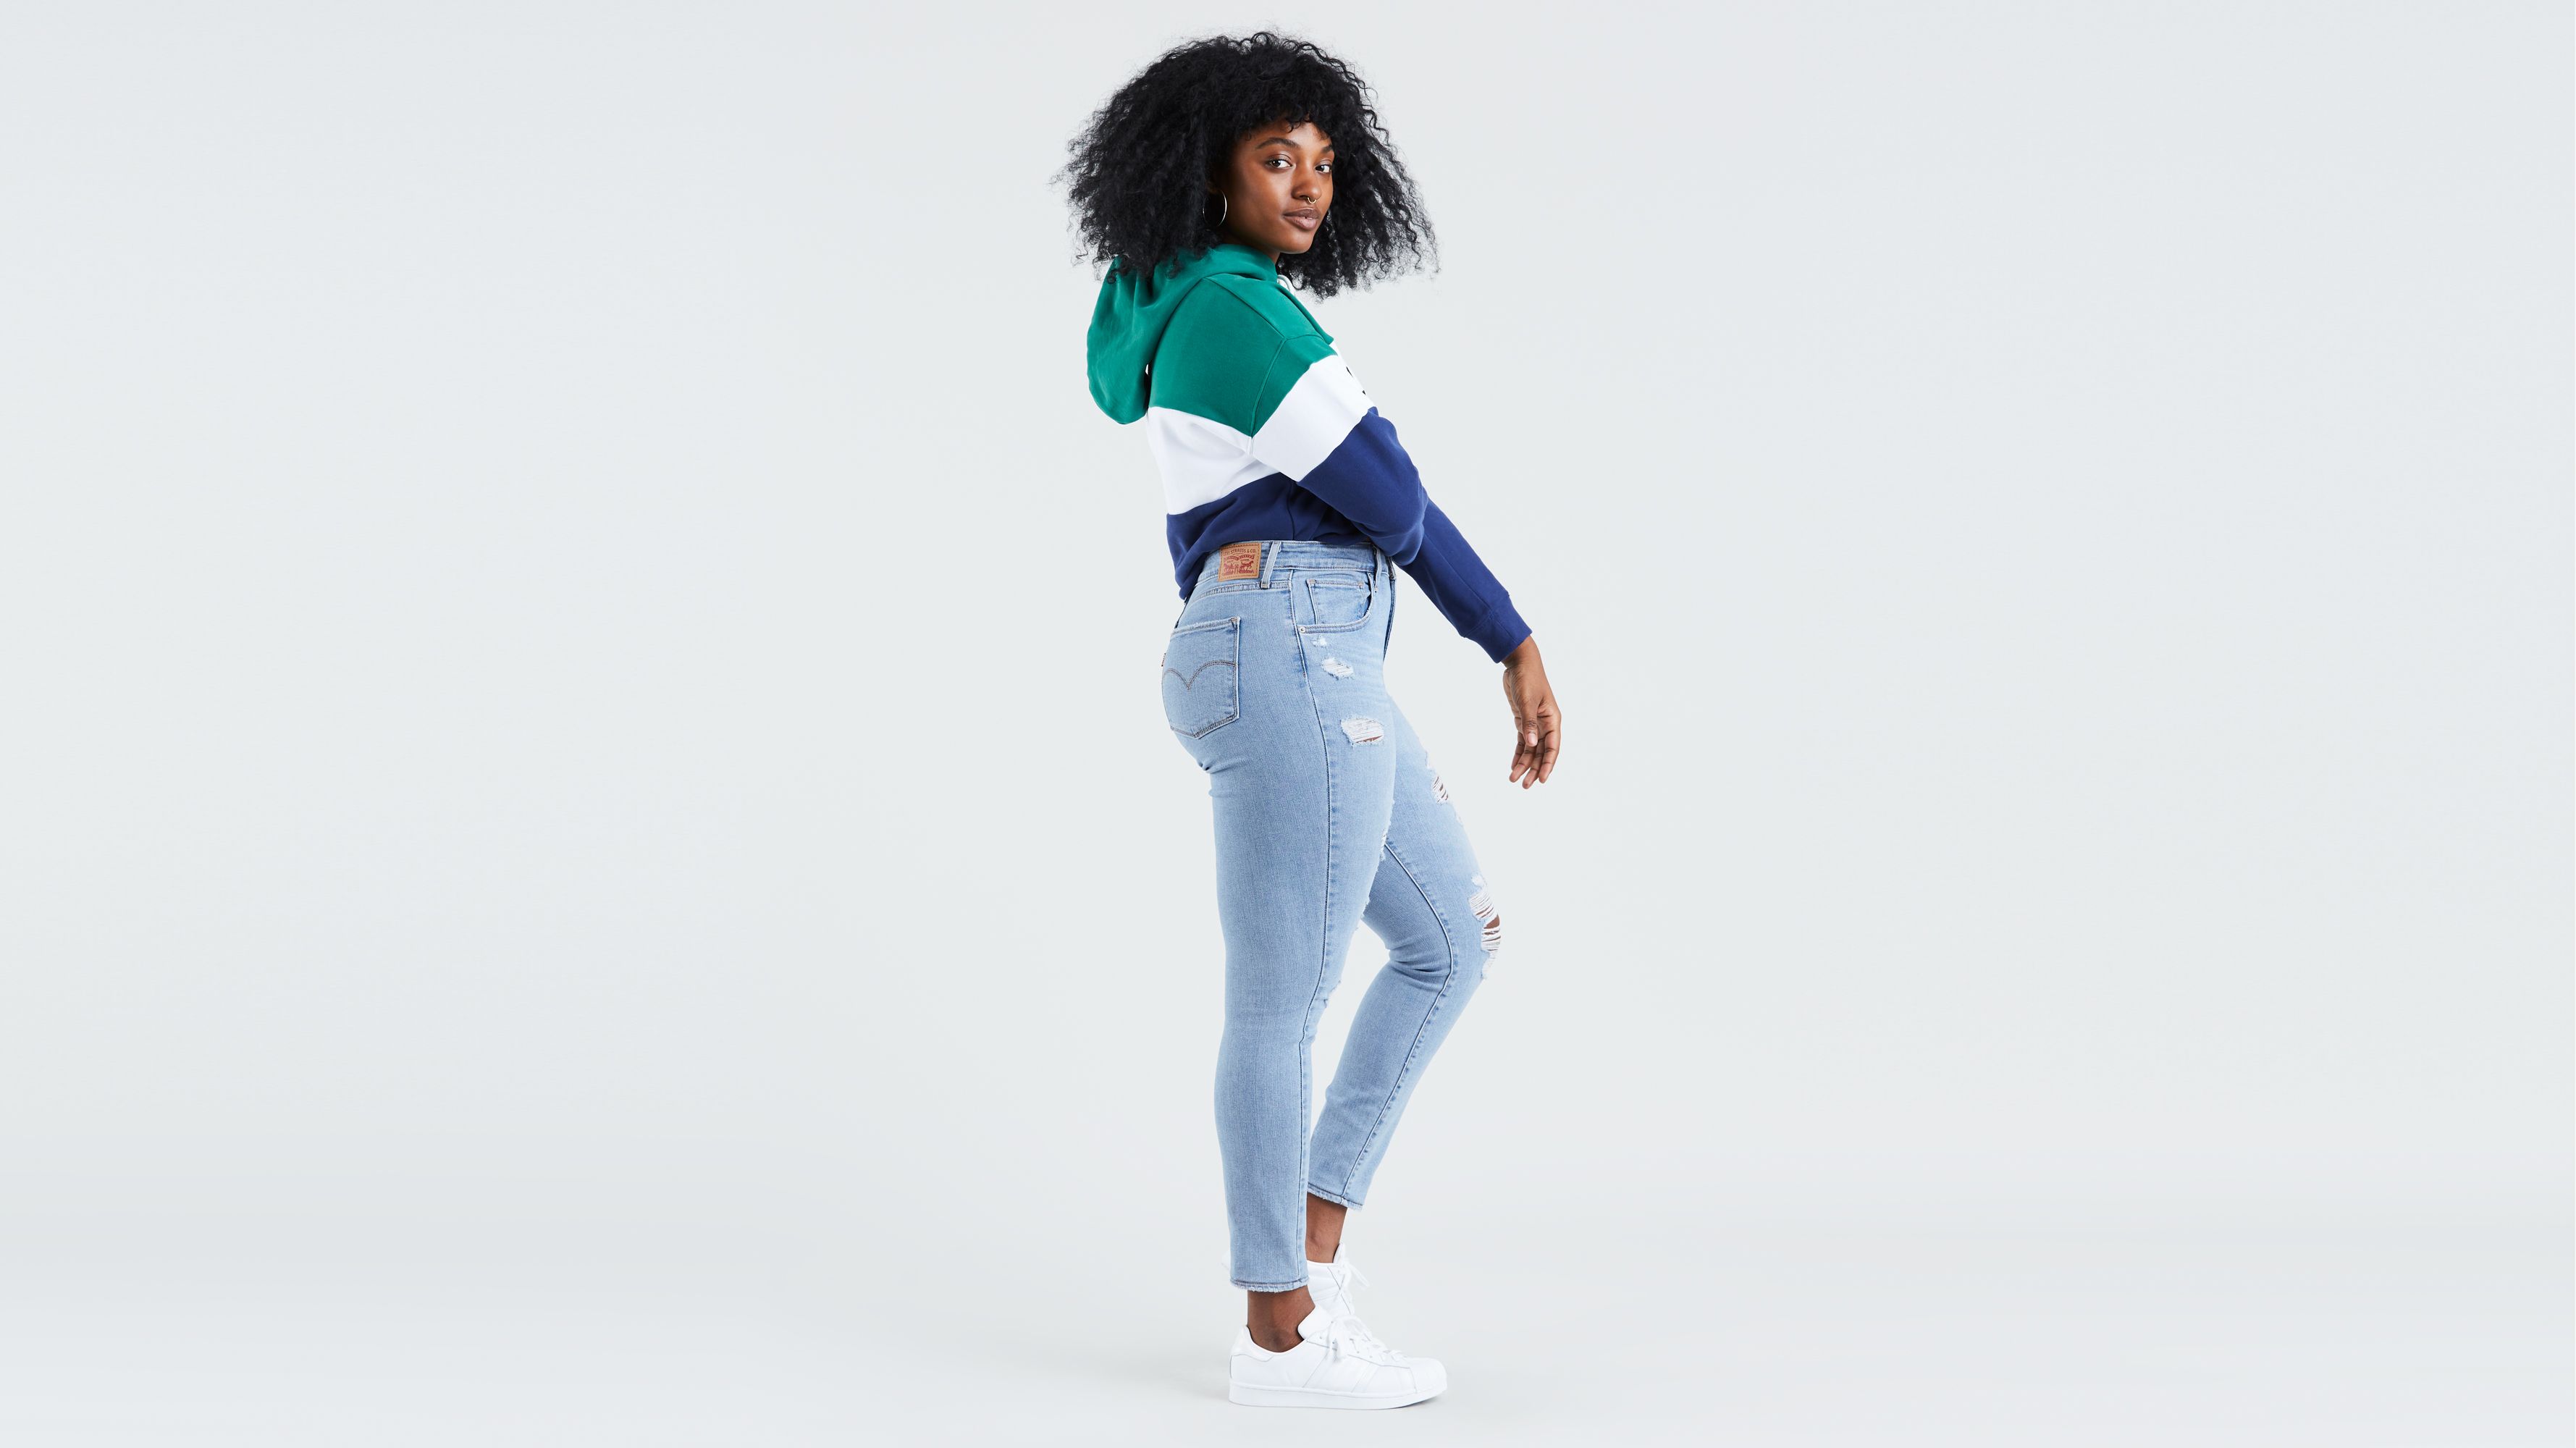 721 High Rise Ripped Skinny Women's Jeans - Light Wash | Levi's® US